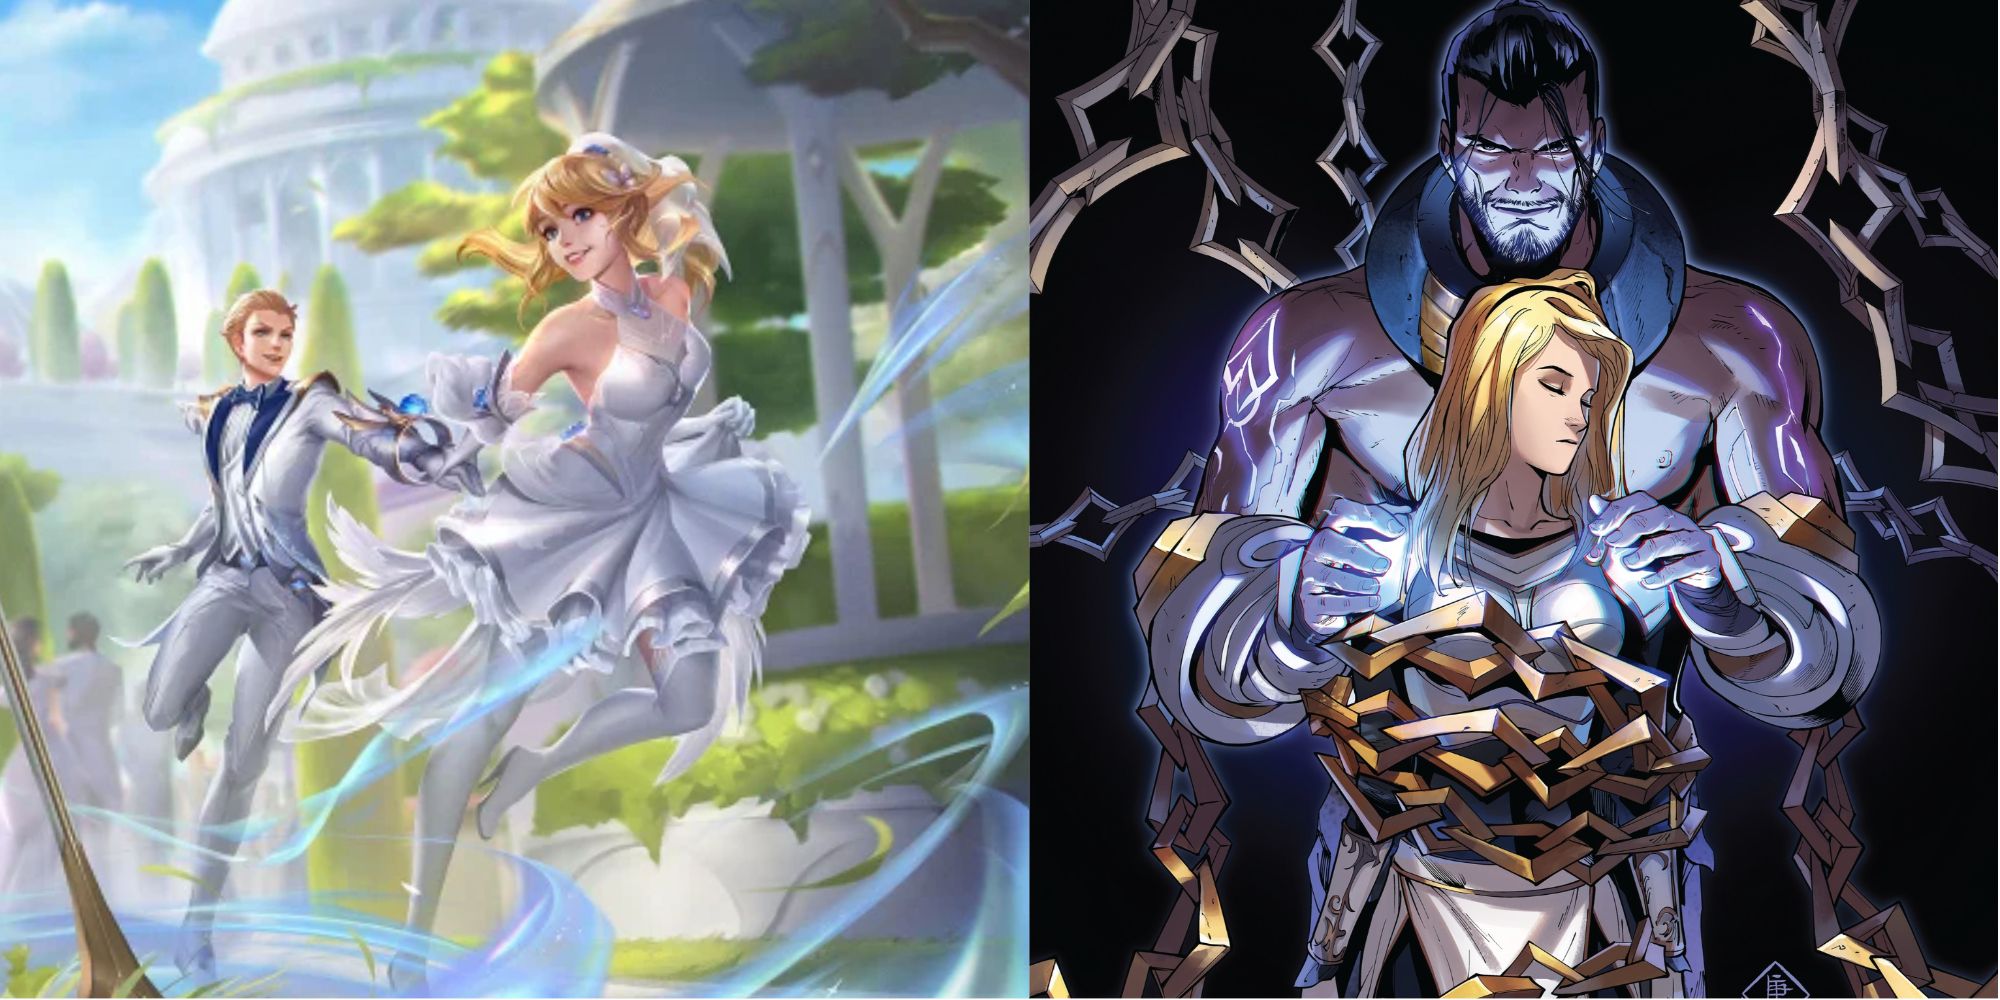 Ezreal Sylas and Lux from League of Legends